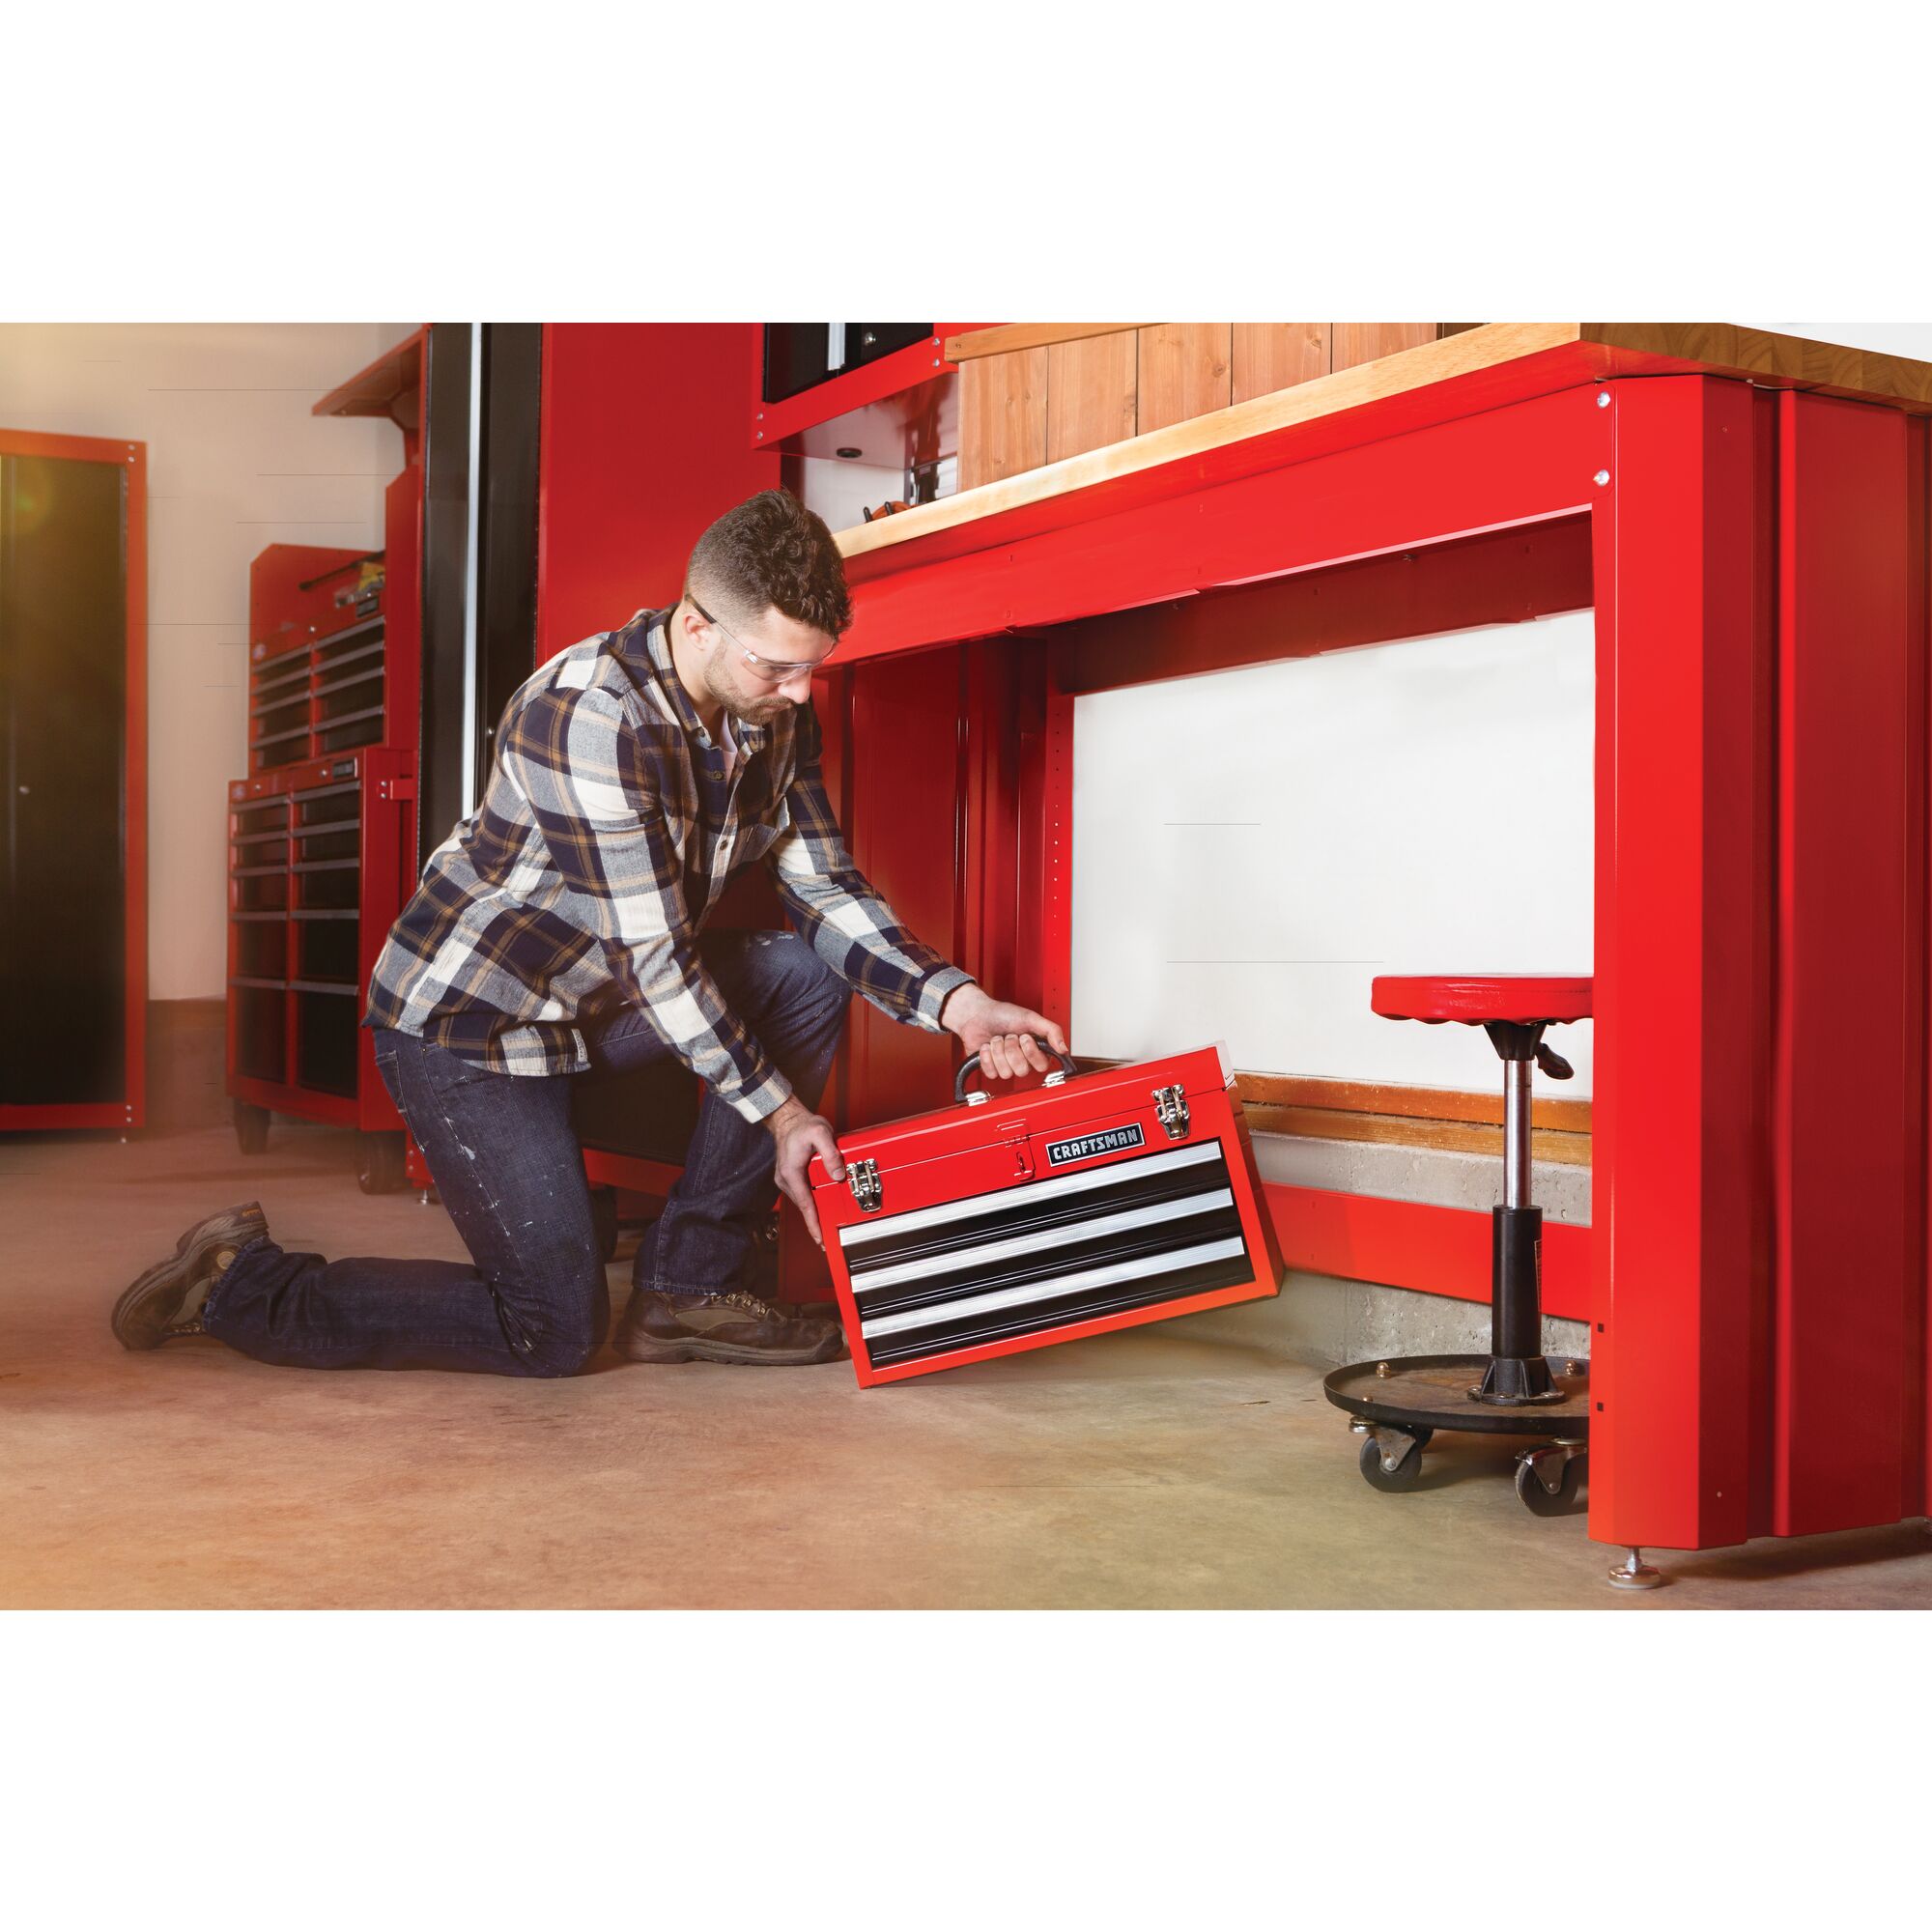 Portable 20 and 5 tenths inch Ball bearing 3 Drawer Red Steel Lockable Tool Box being stored by person under workstation.